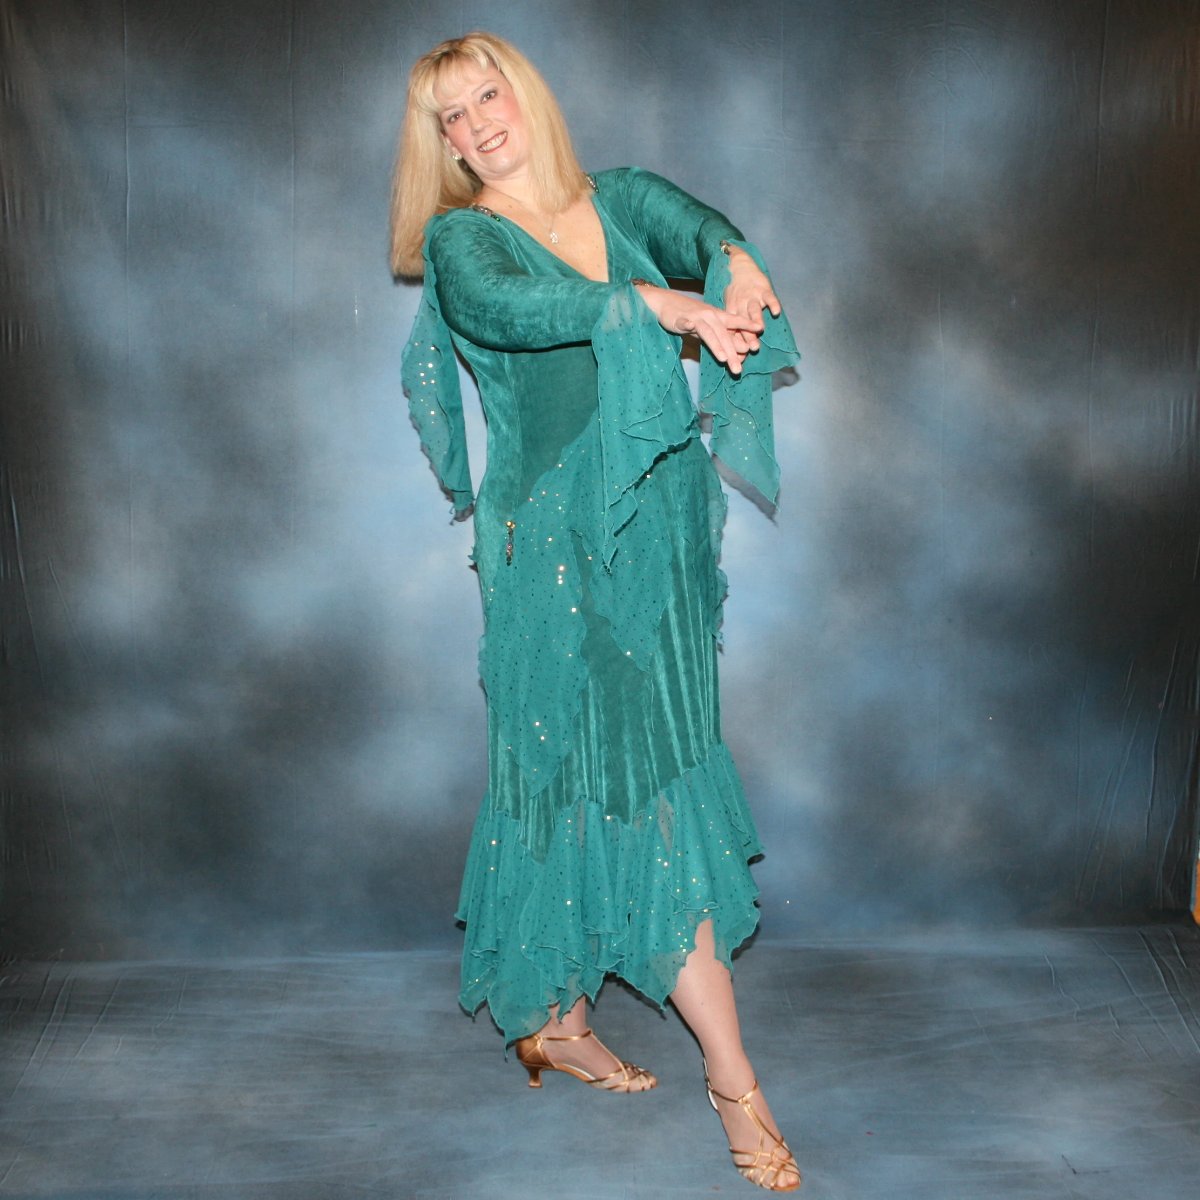 another view of Teal plus size ballroom dance dress was created in luxurious teal solid slinky with oodles of champagne sequined chiffon flounces & floats, embellished with a lovely touch of Swarovski hand beading on a blonde model